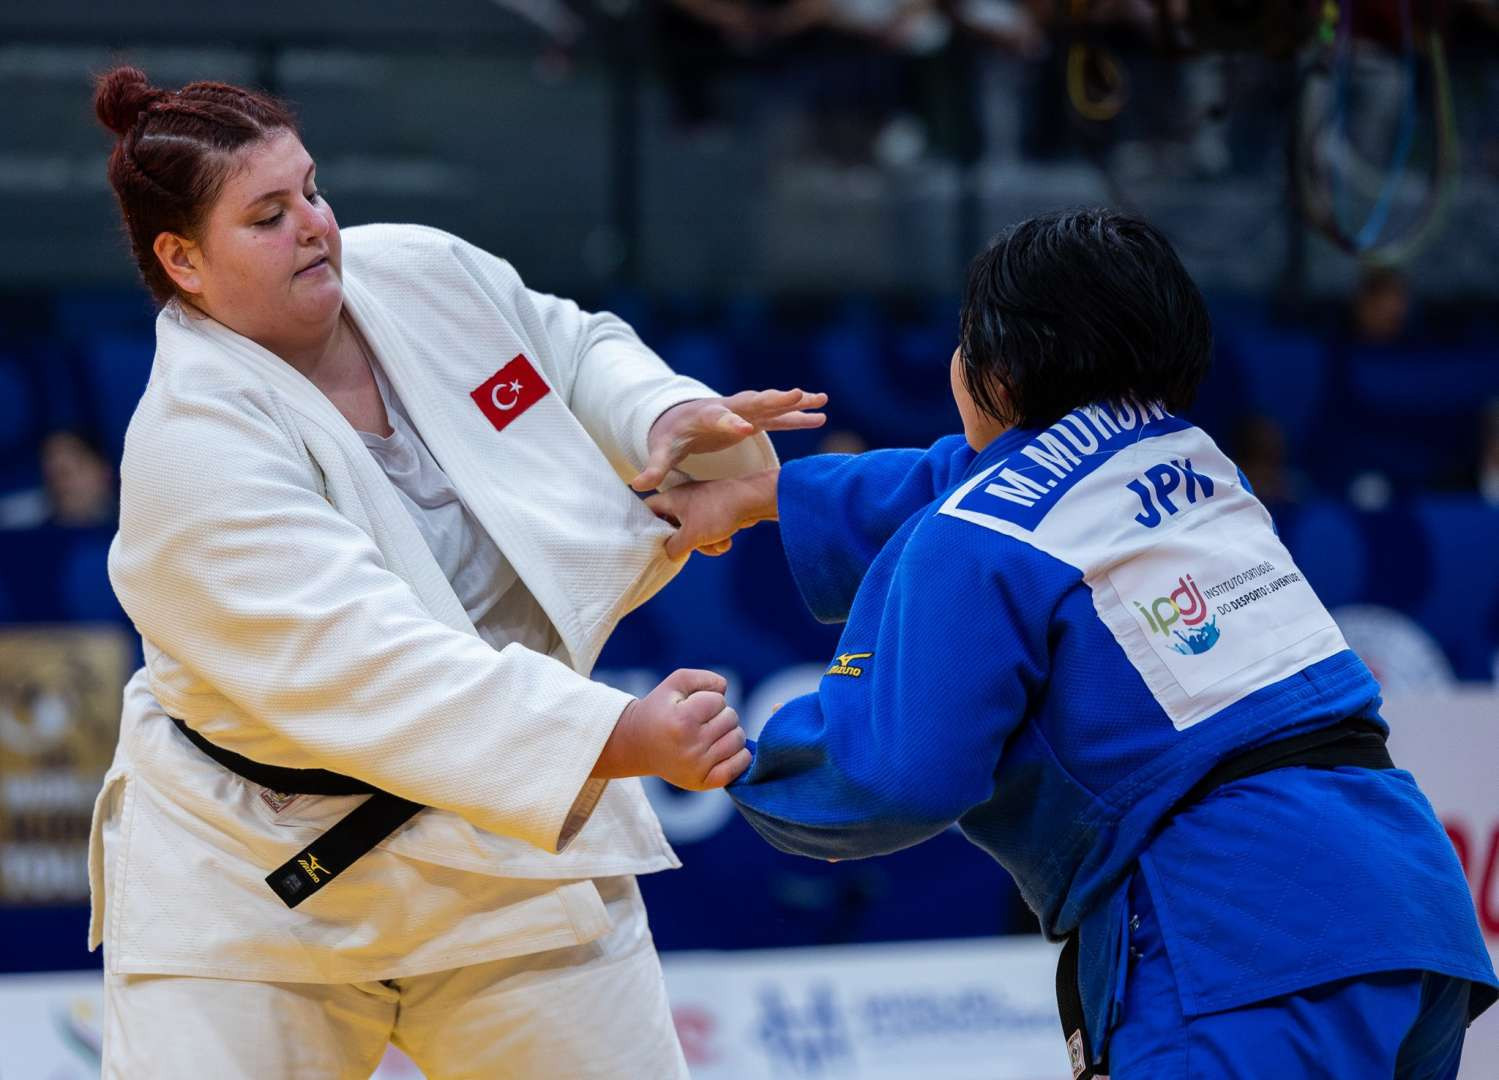 Final of the women's +78 kg category between Turkey's Hilal Ozturk (in white) and Japan's Miki Mukunoki. IJF